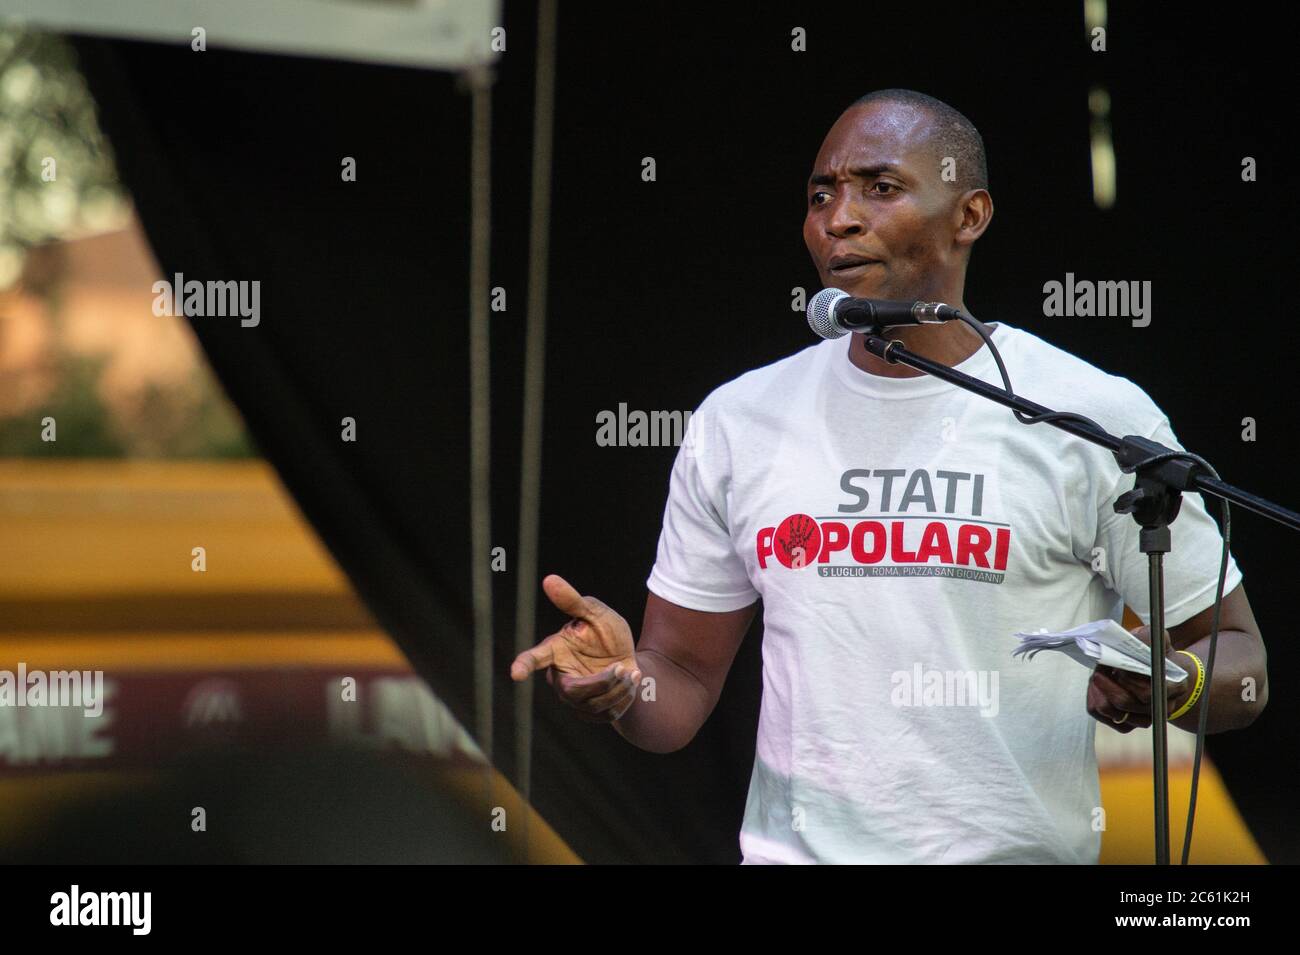 Aboubakar Soumahoro, Italian-Ivorian trade unionist of the Agricultural Coordination of the Union of Base Union (USB). 'Stati Popolari', event organized in Piazza San Giovanni, in Rome, Italy, 5-07-2020. Stock Photo